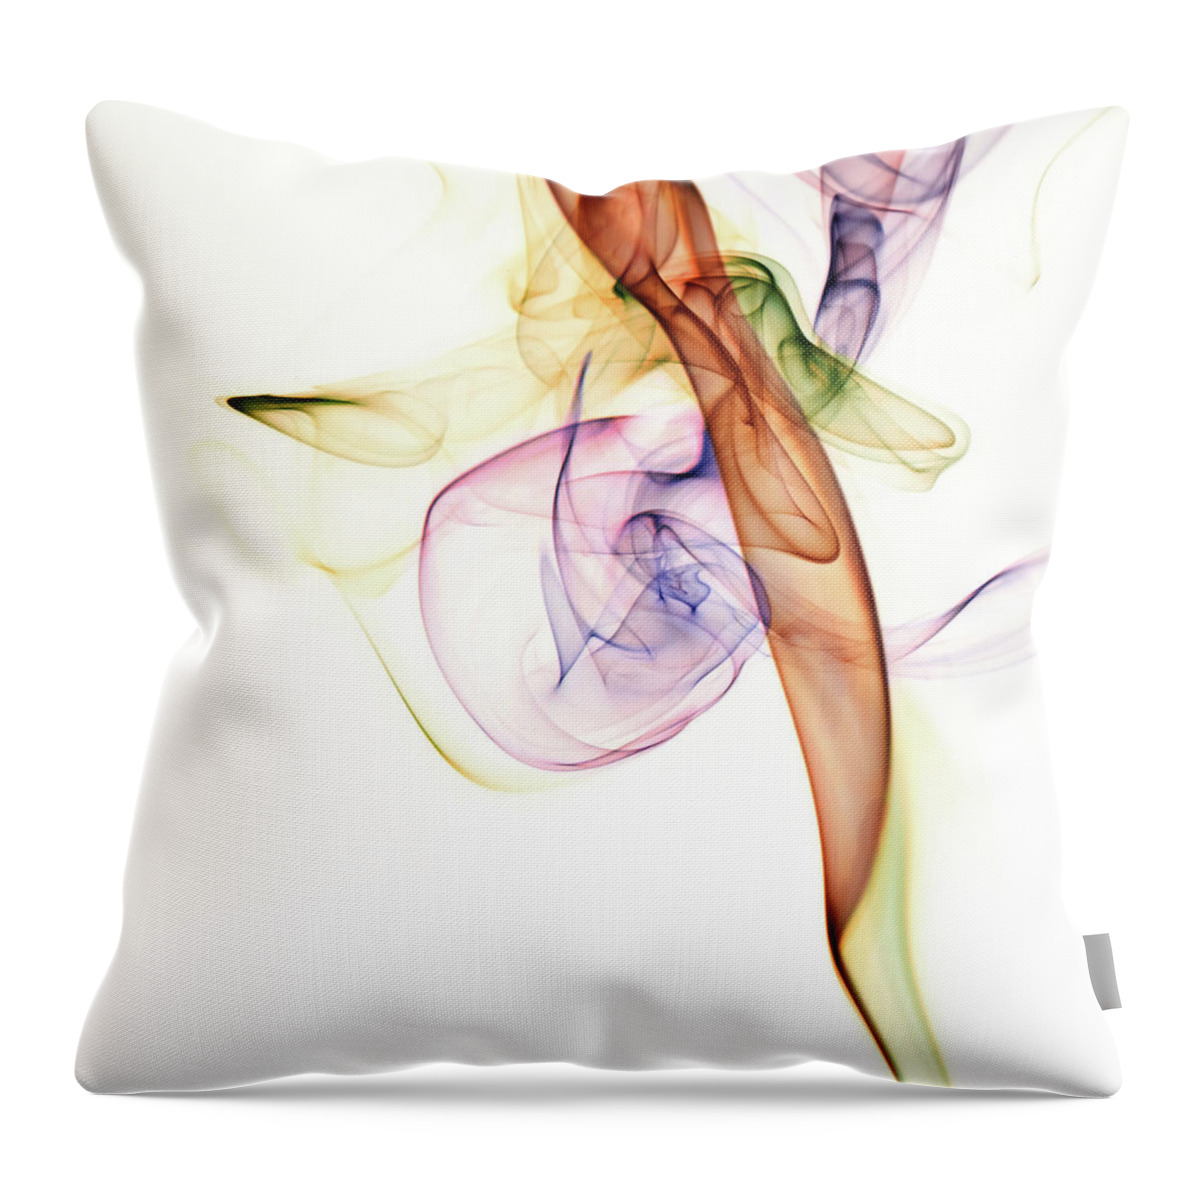 White Background Throw Pillow featuring the photograph Colored Smoke In White Background by Enrique Pellejer